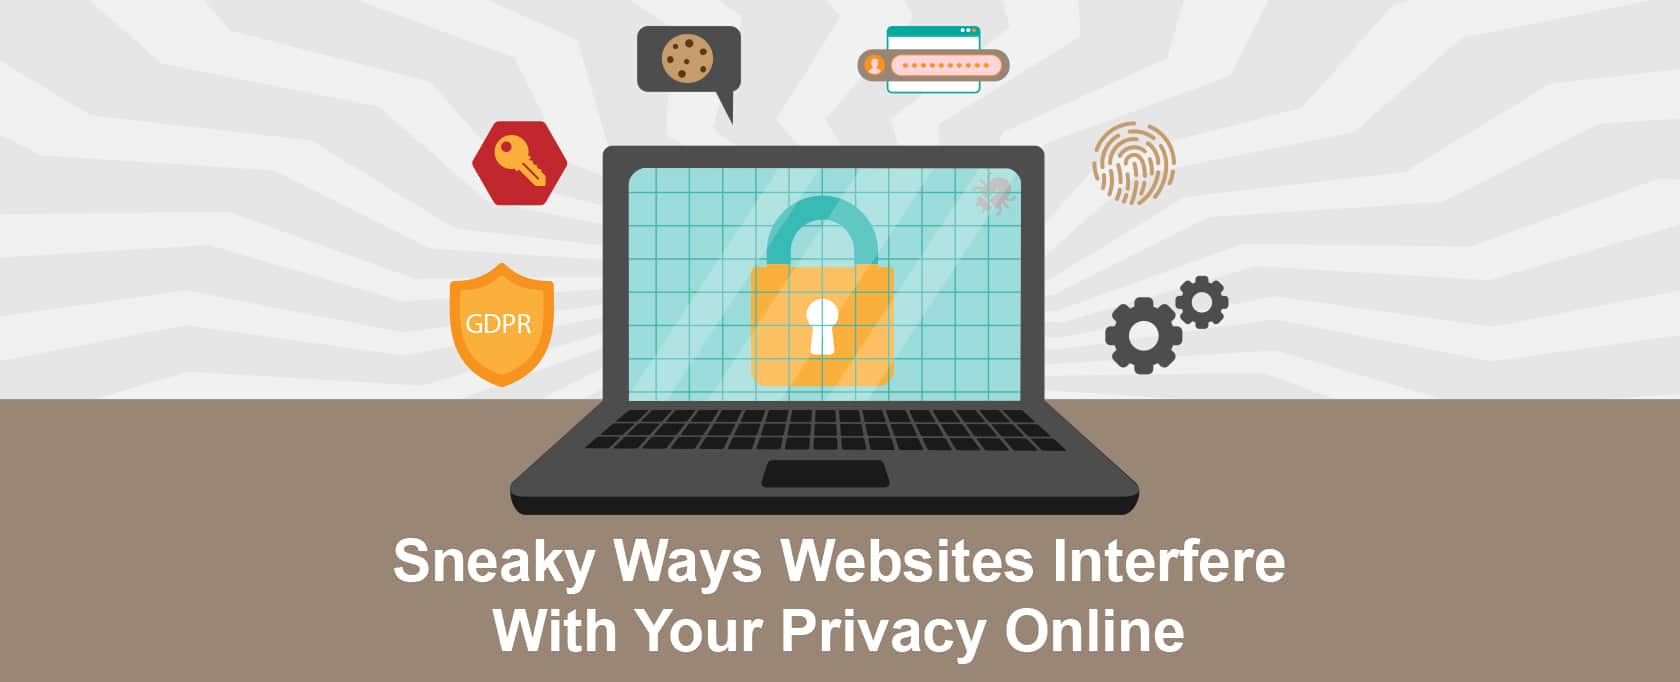 Sneaky Ways Websites Interfere With Your Privacy Online